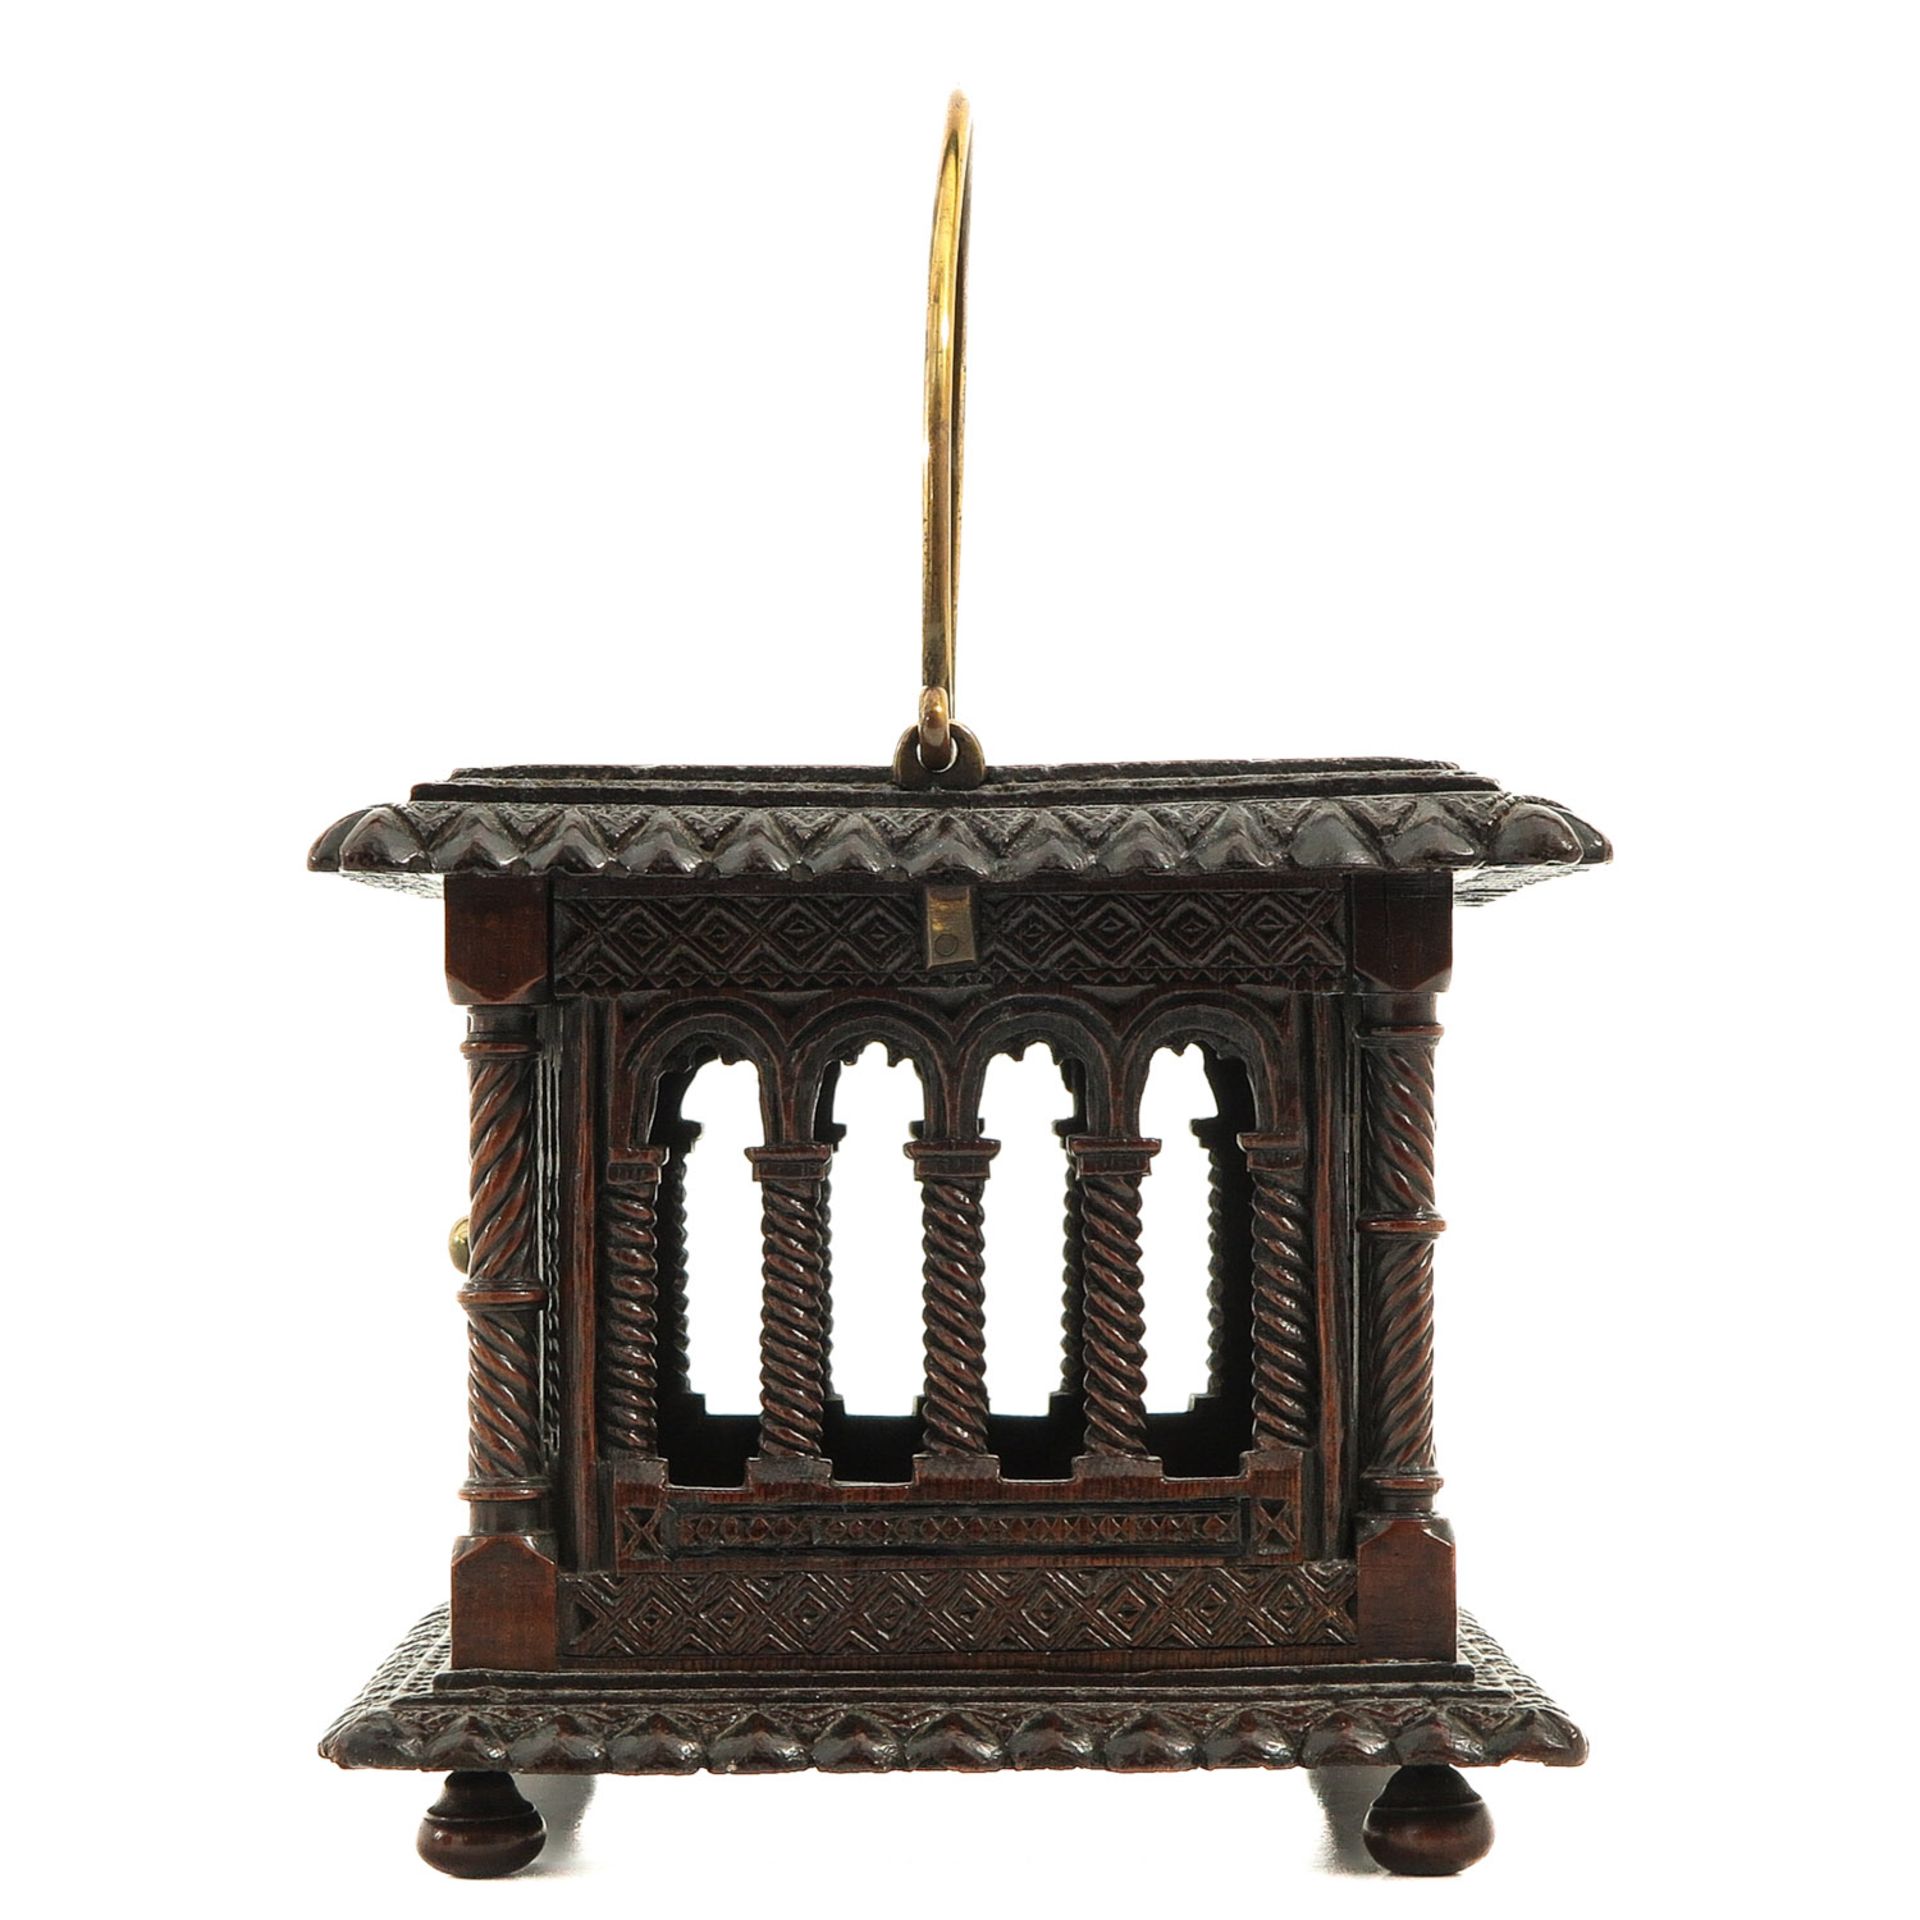 A Carved Wood Stove - Image 2 of 9